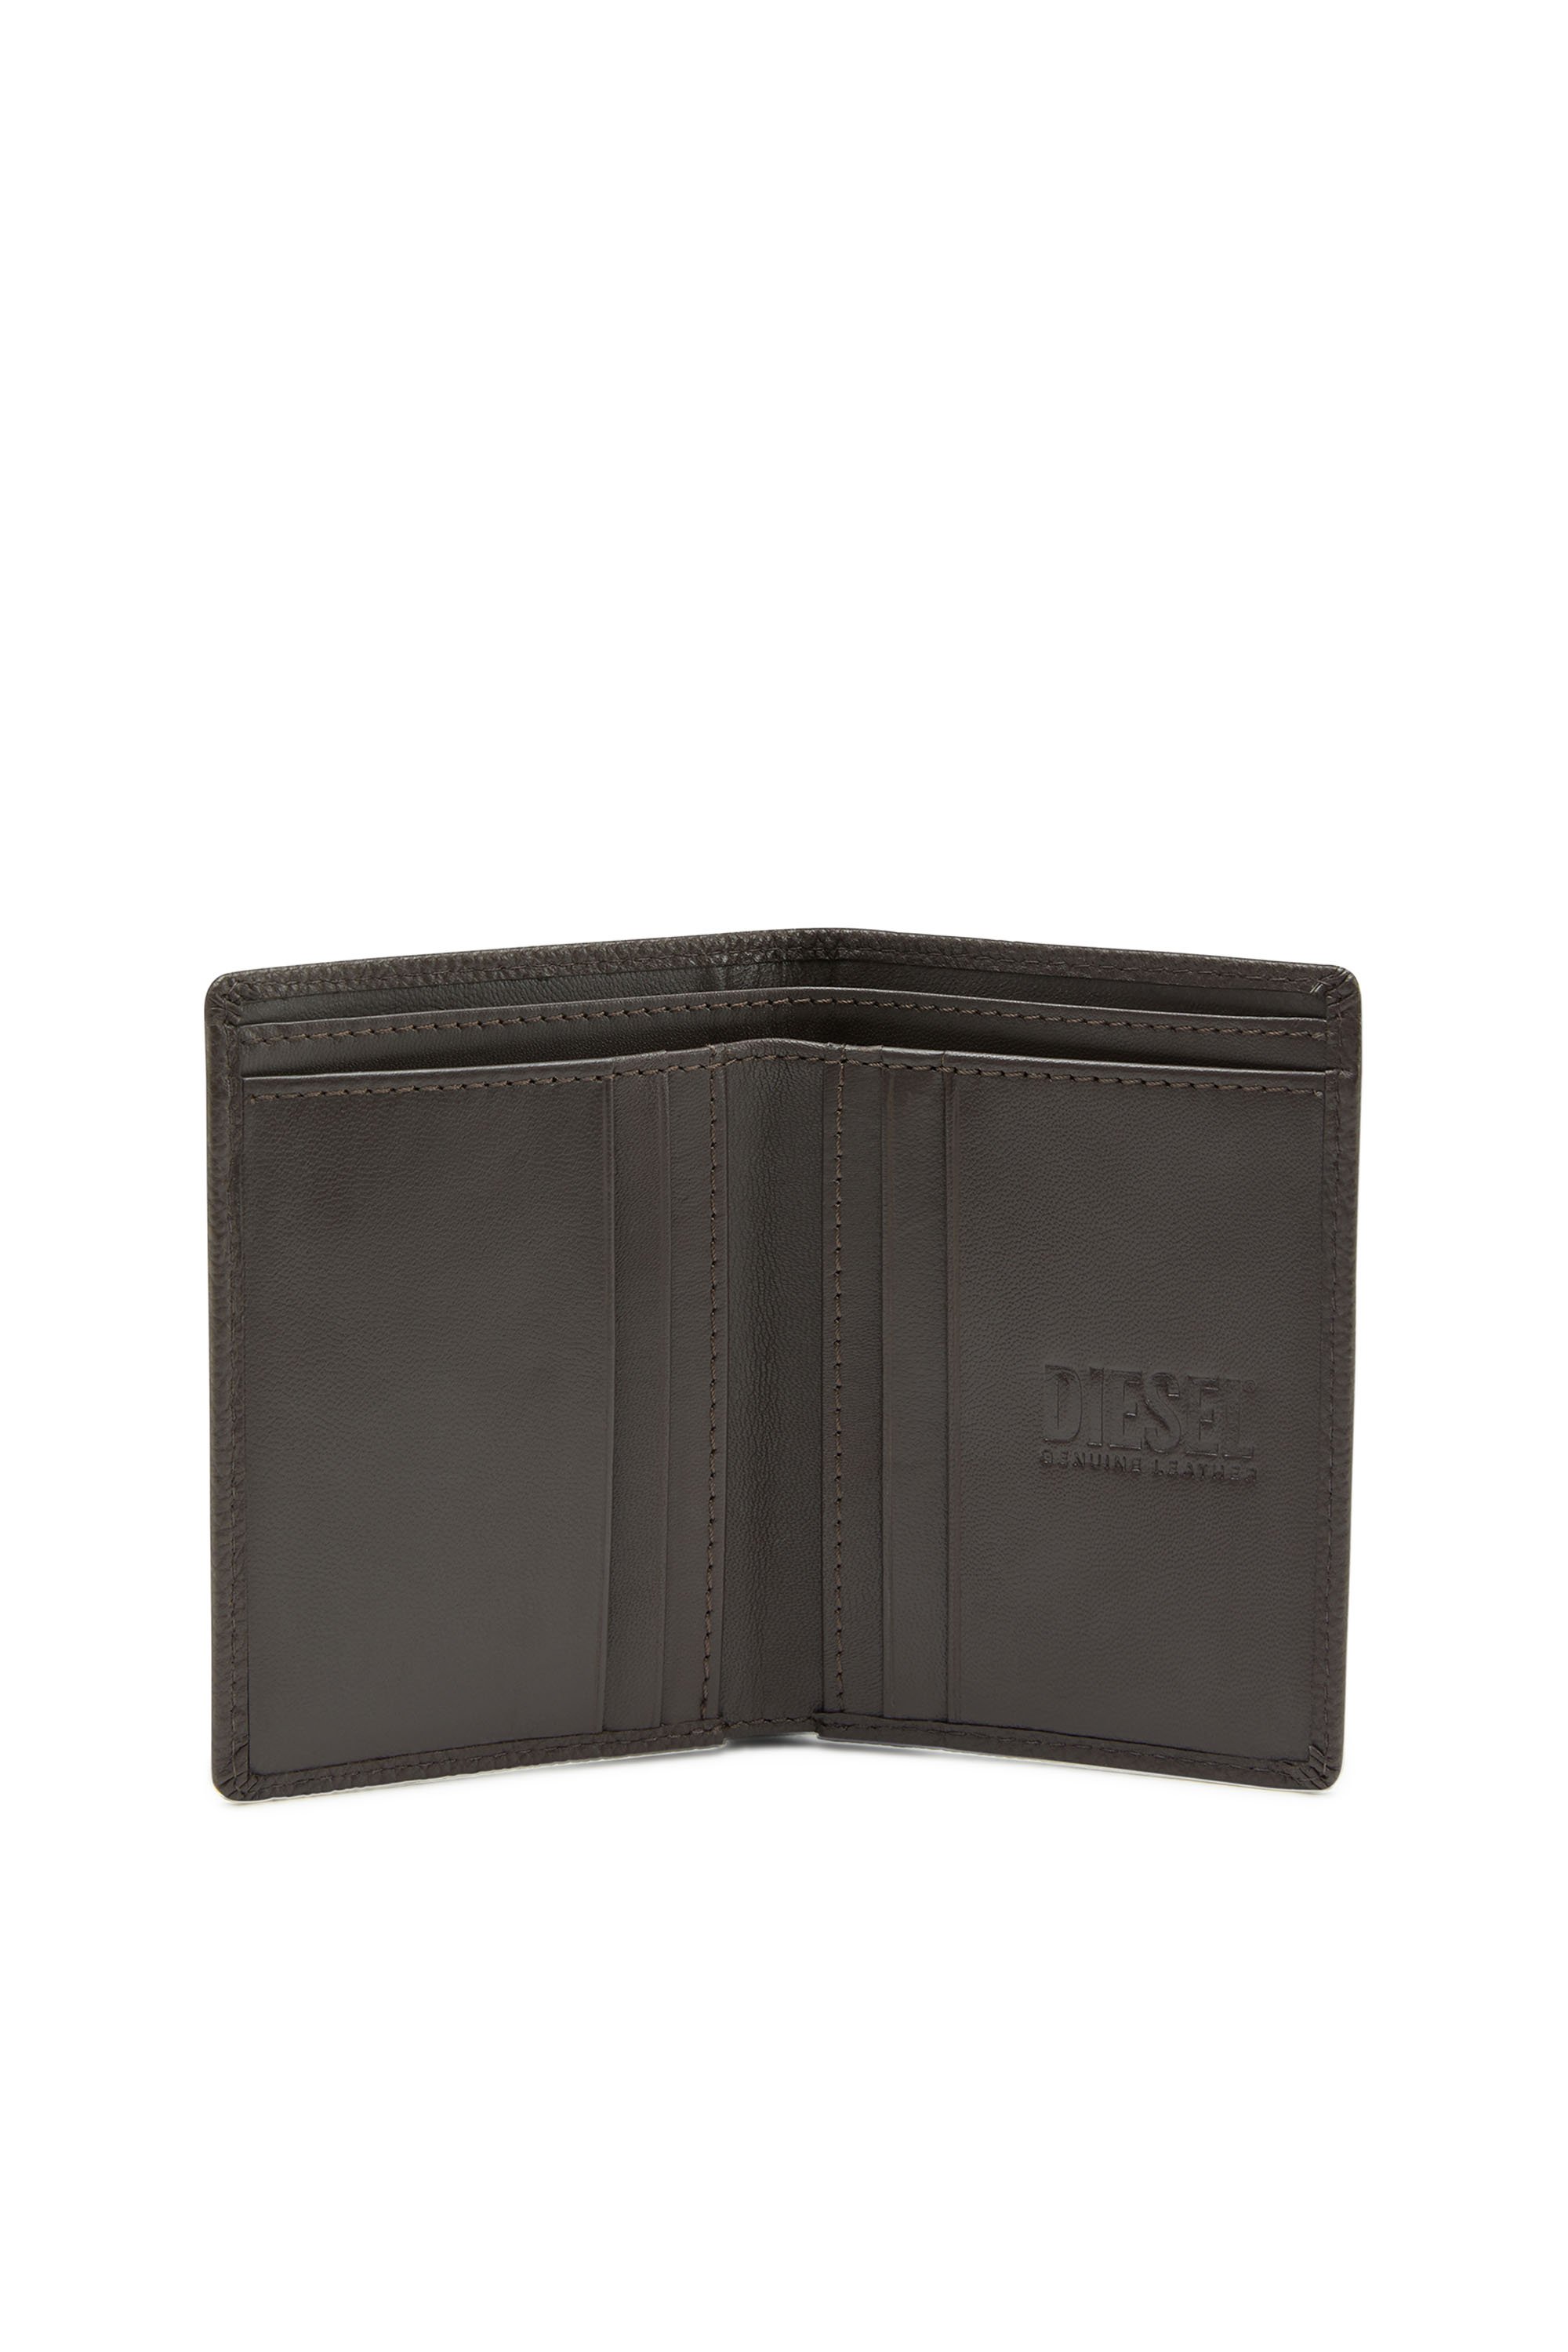 Tods Leather Wallet in Light Grey Mens Accessories Wallets and cardholders for Men Grey 